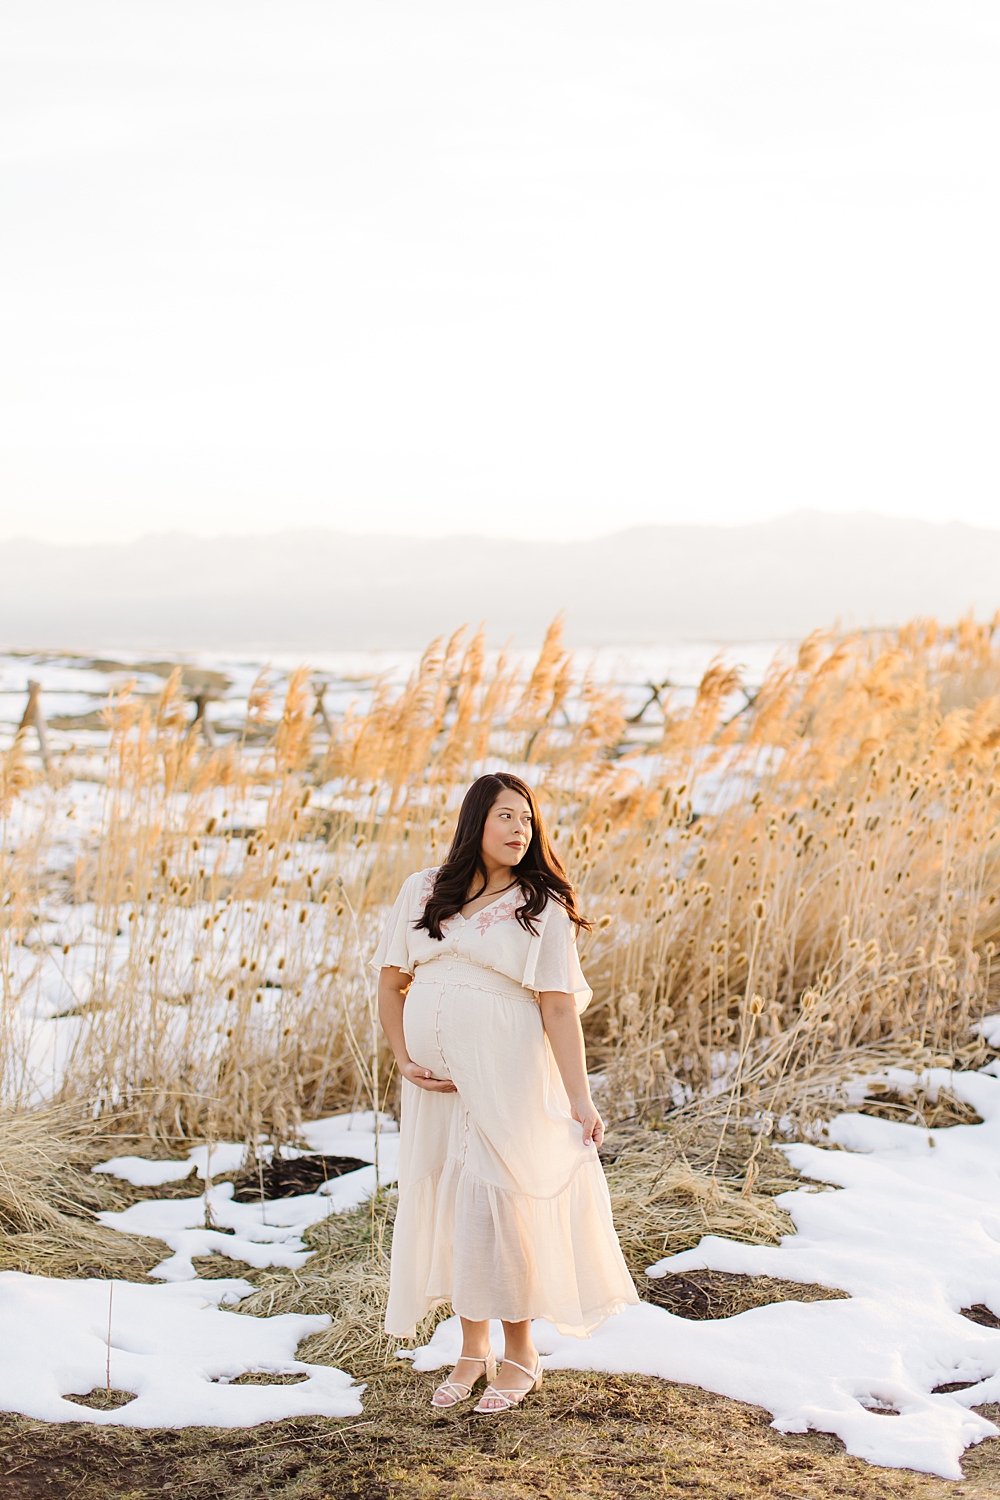 Winter Maternity Session at Tunnel Springs